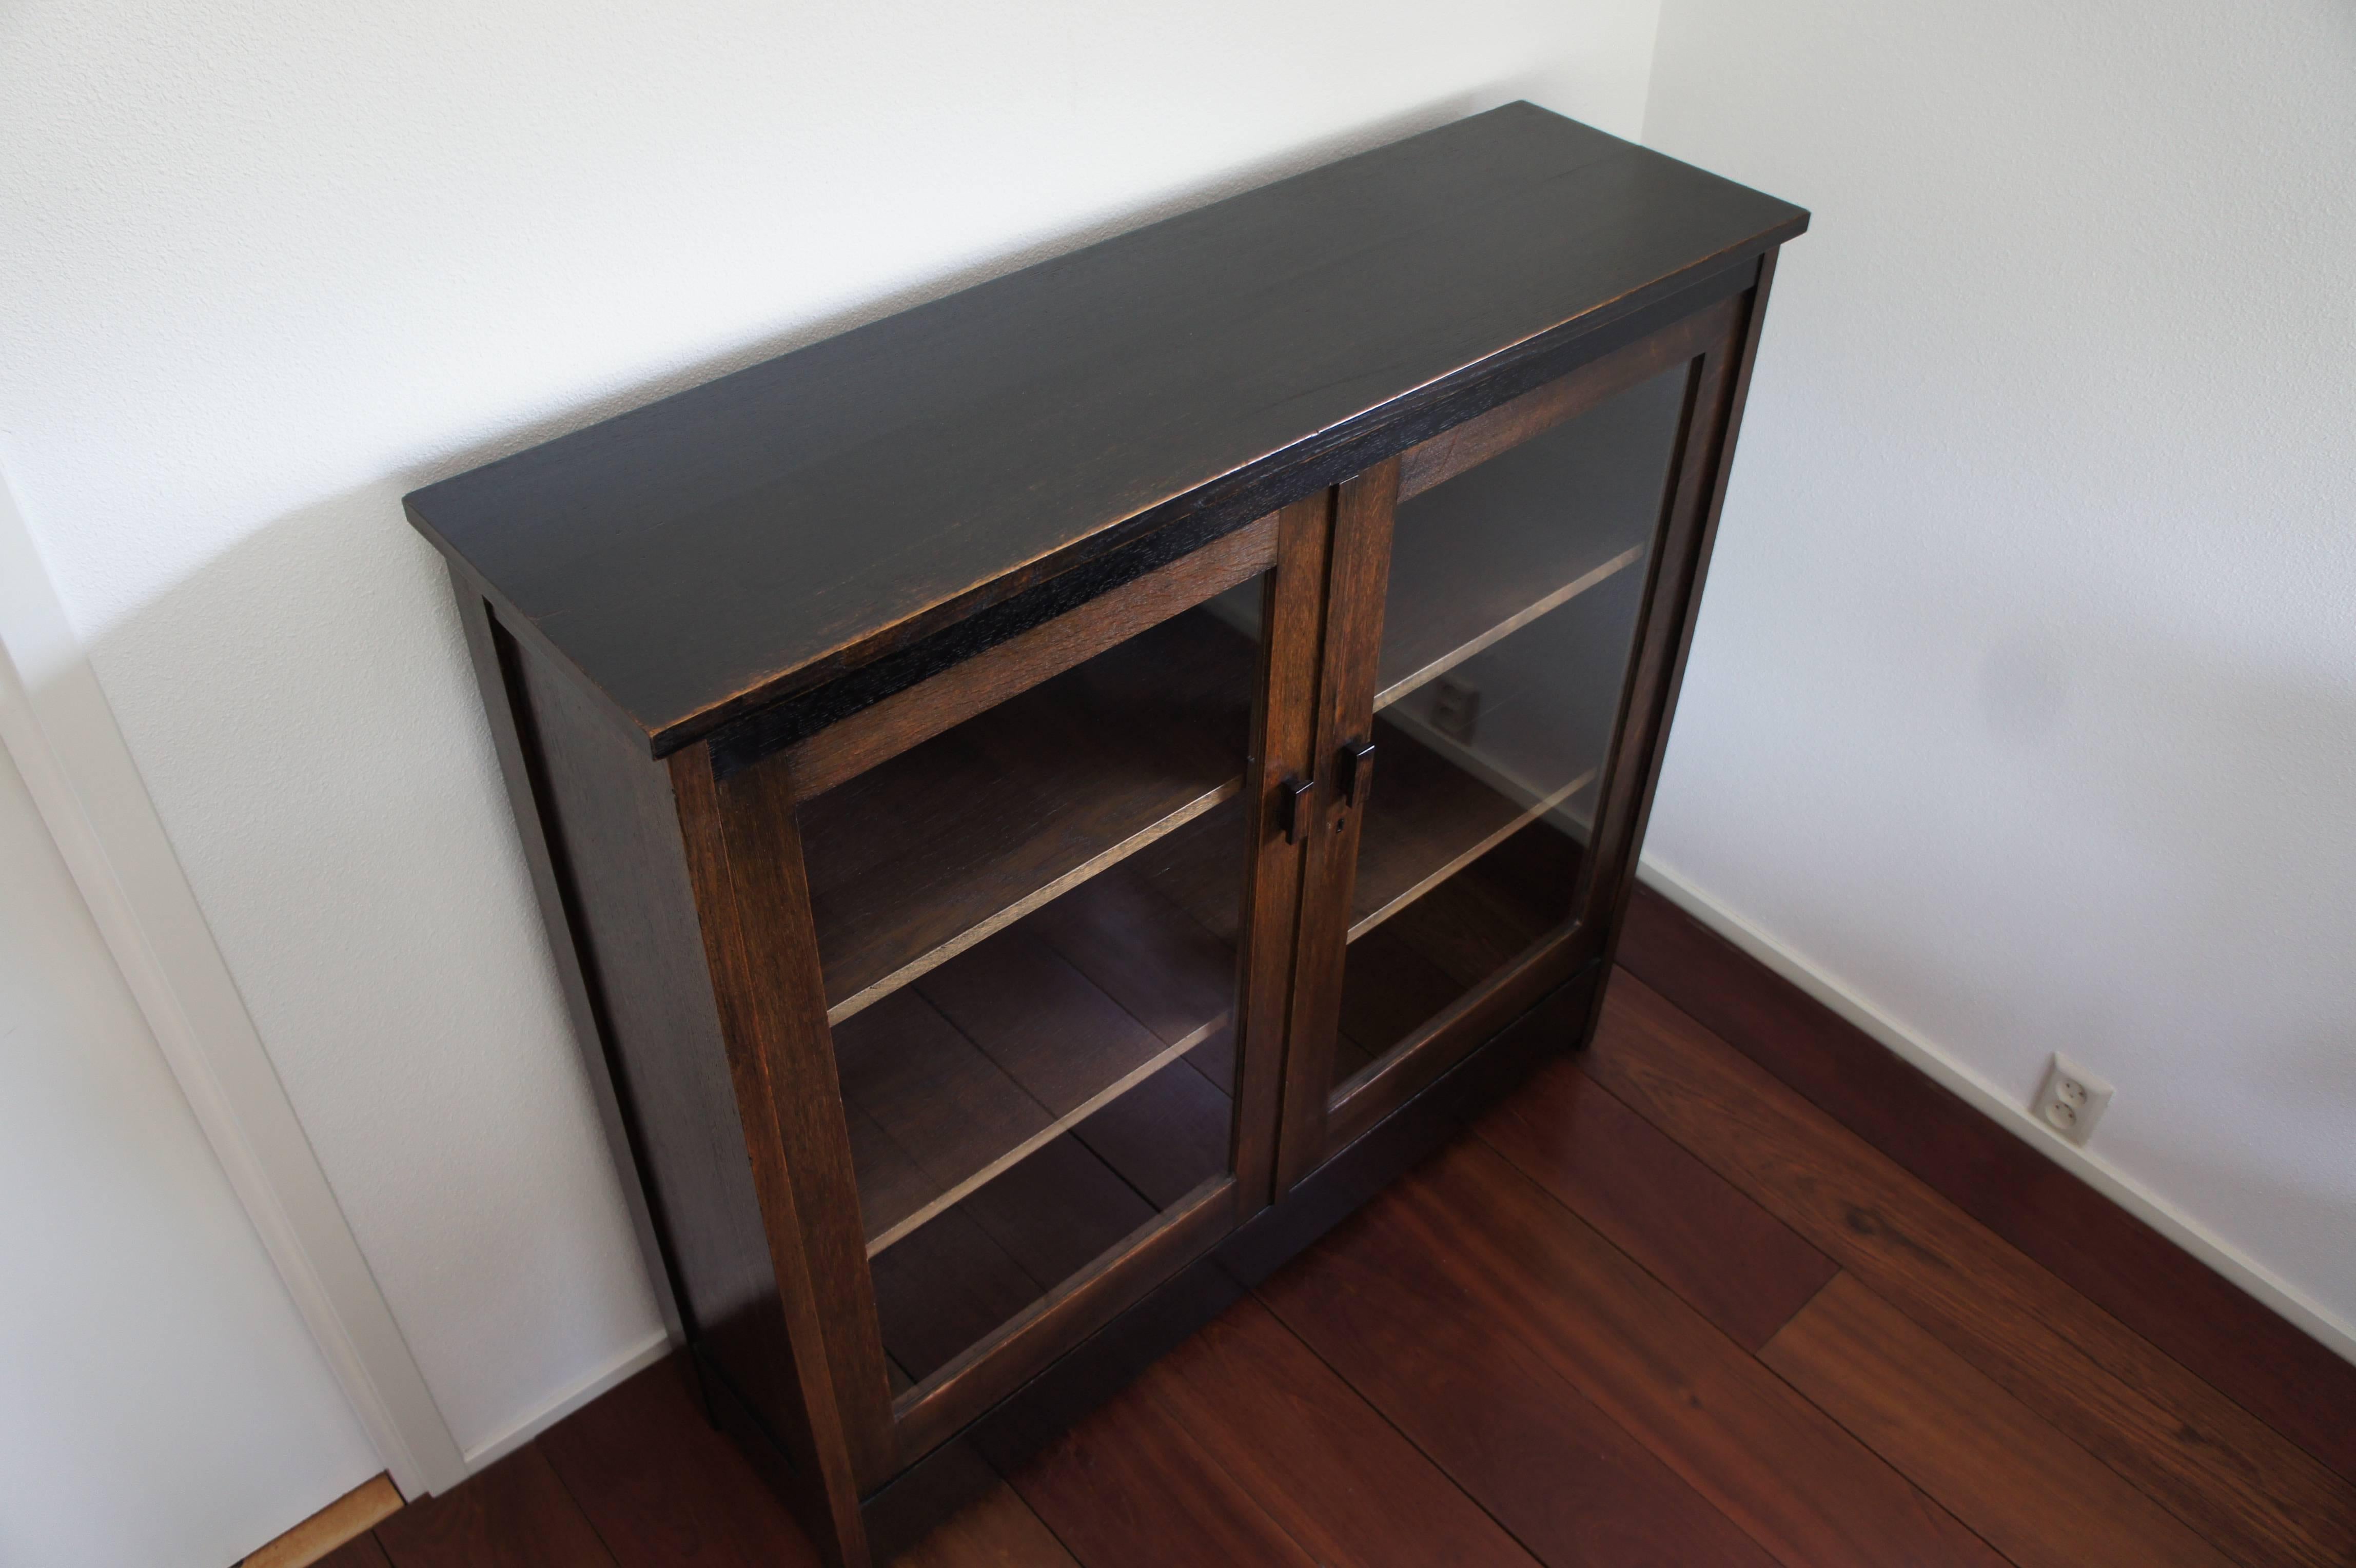 Blackened Art Deco Haagse School / The Hague School Desk and Bookcase by LOV Oosterbeek For Sale